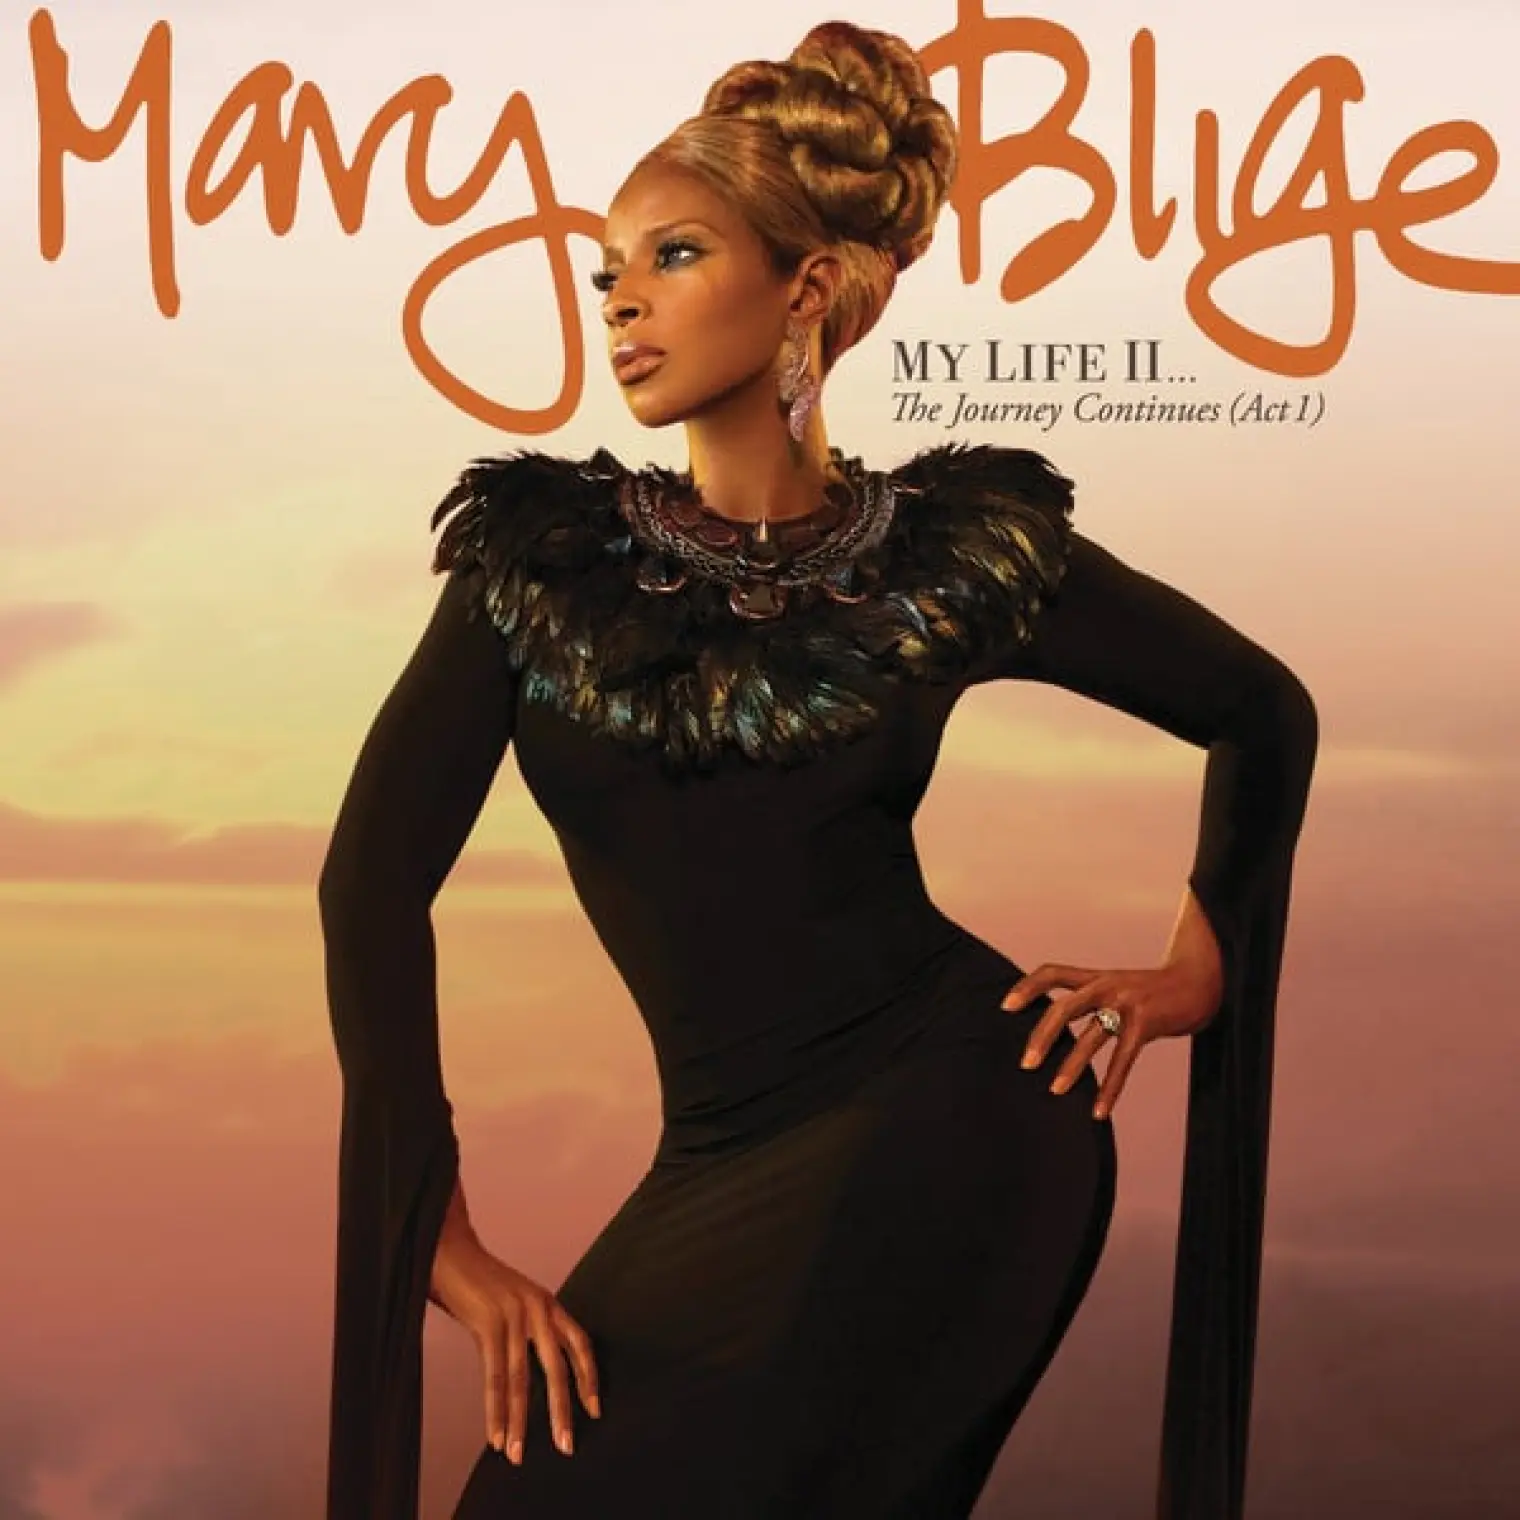 My Life II...The Journey Continues (Act 1) -  Mary J. Blige 